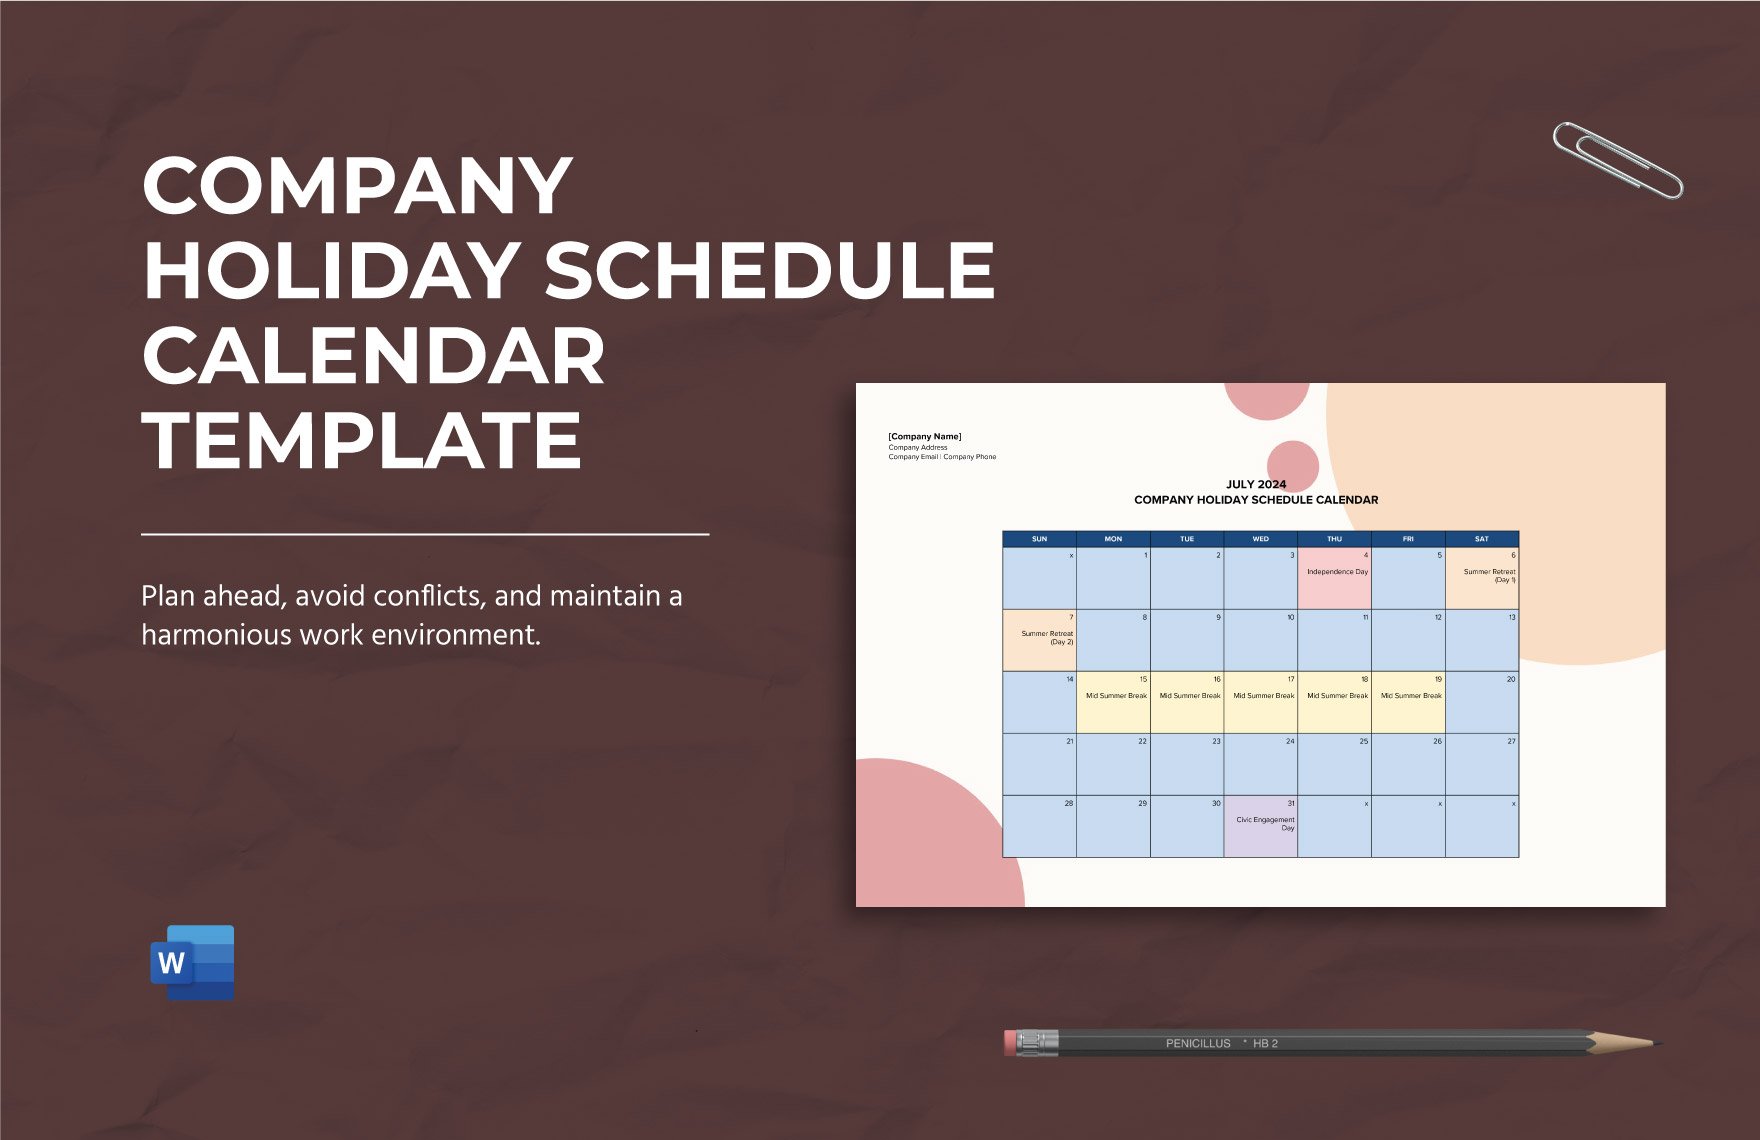 Company Holiday Schedule Calendar Template Download in Word